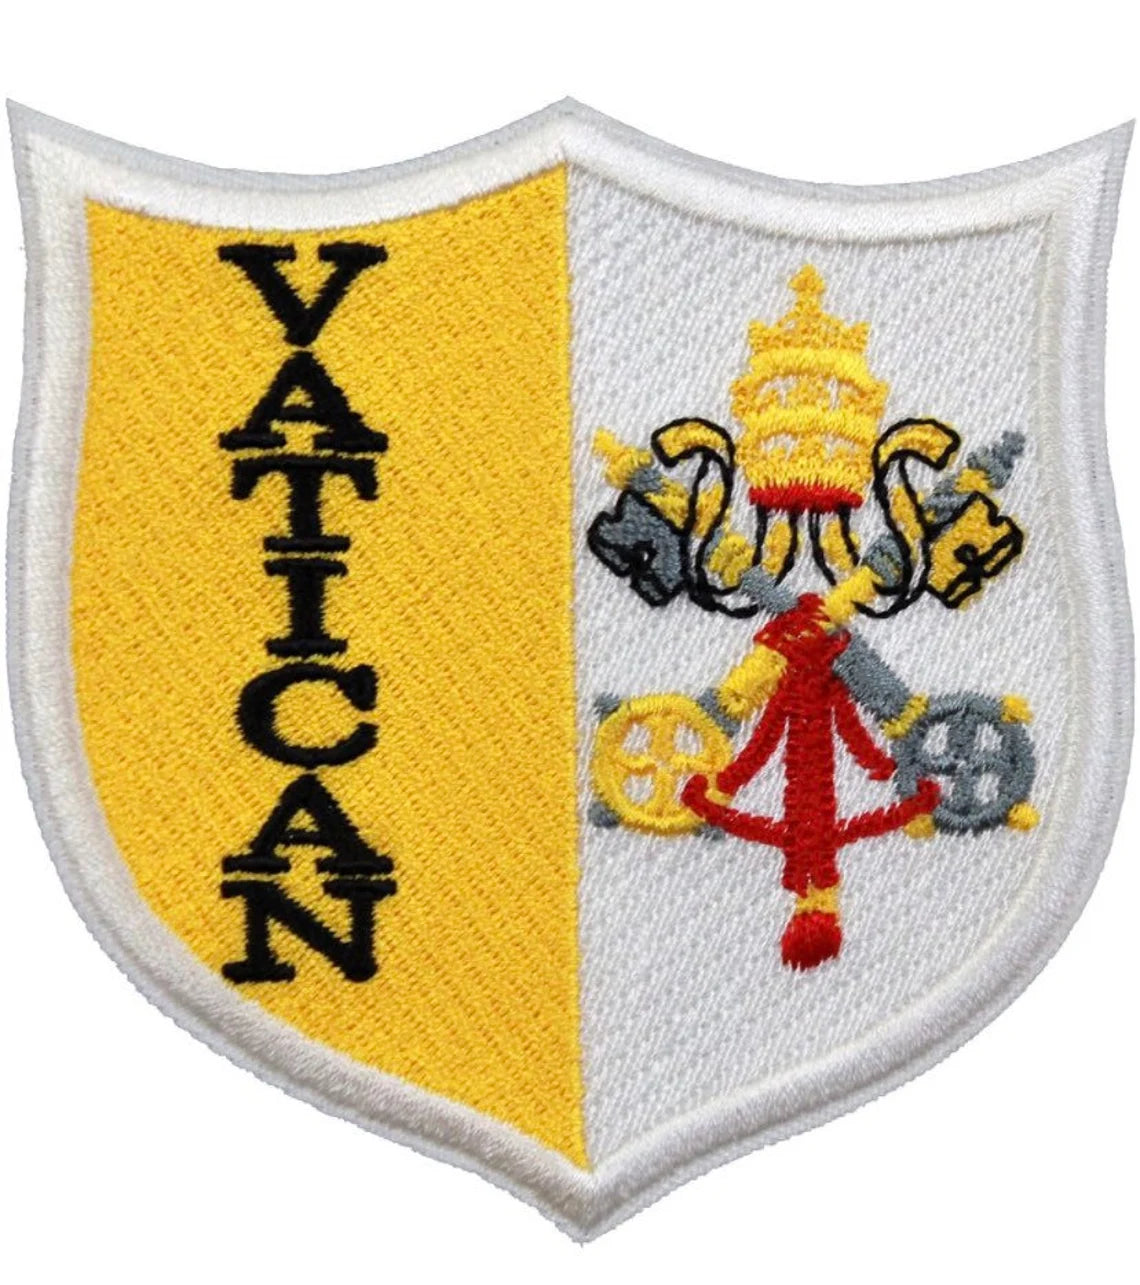 Vatican City Crest Patch (3 Inch) Iron-on Badge Rome Italy Patches